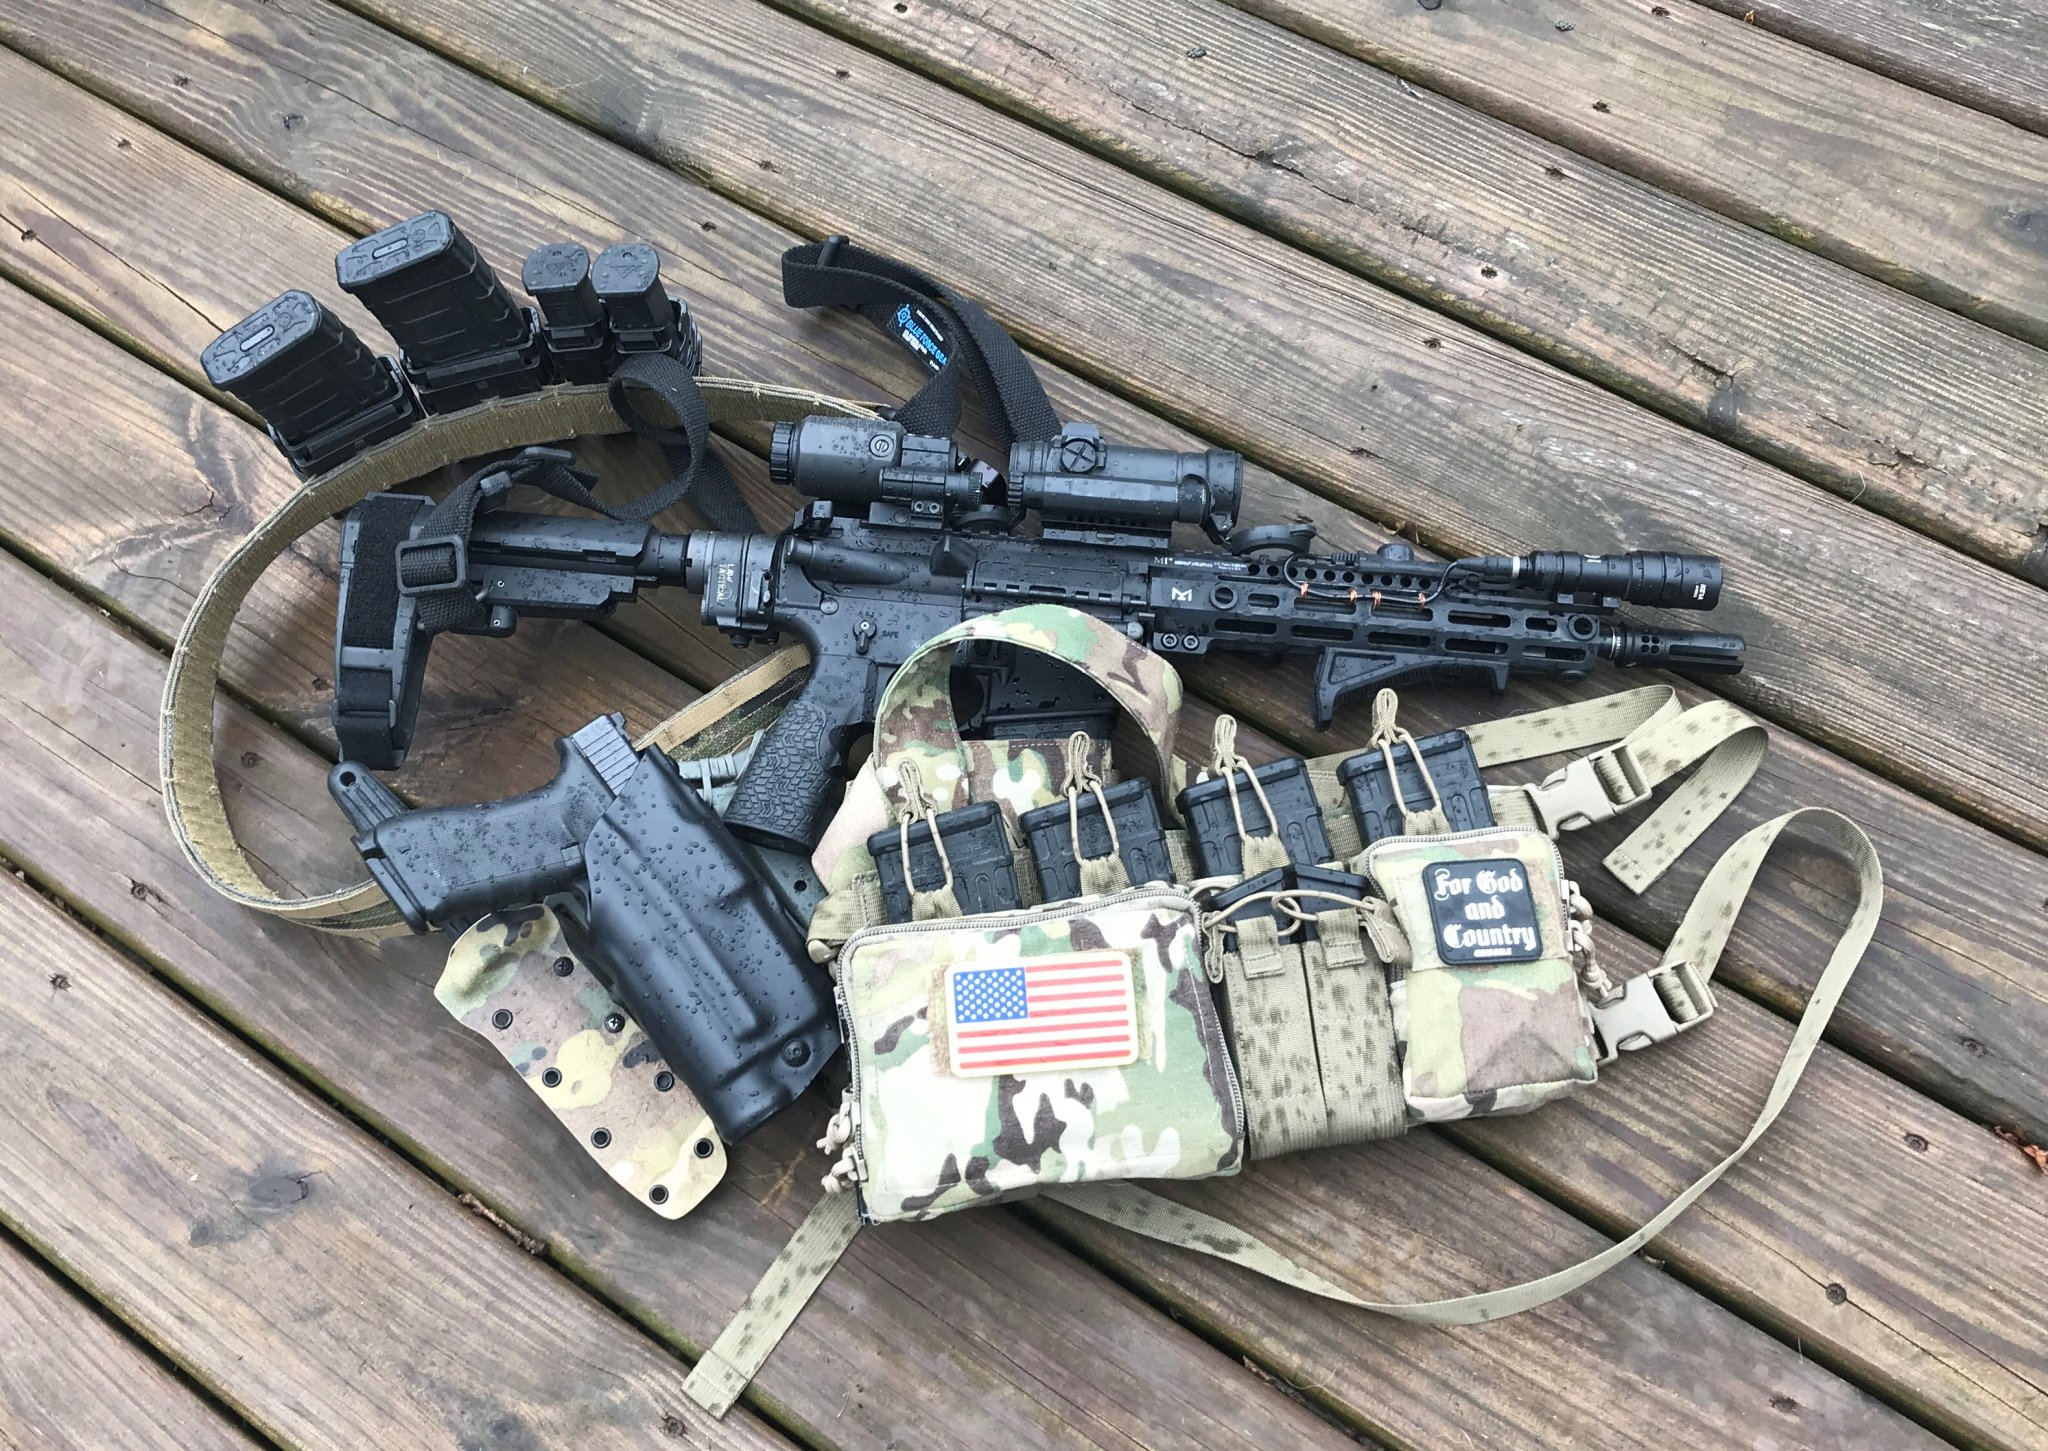 Load out.JPG